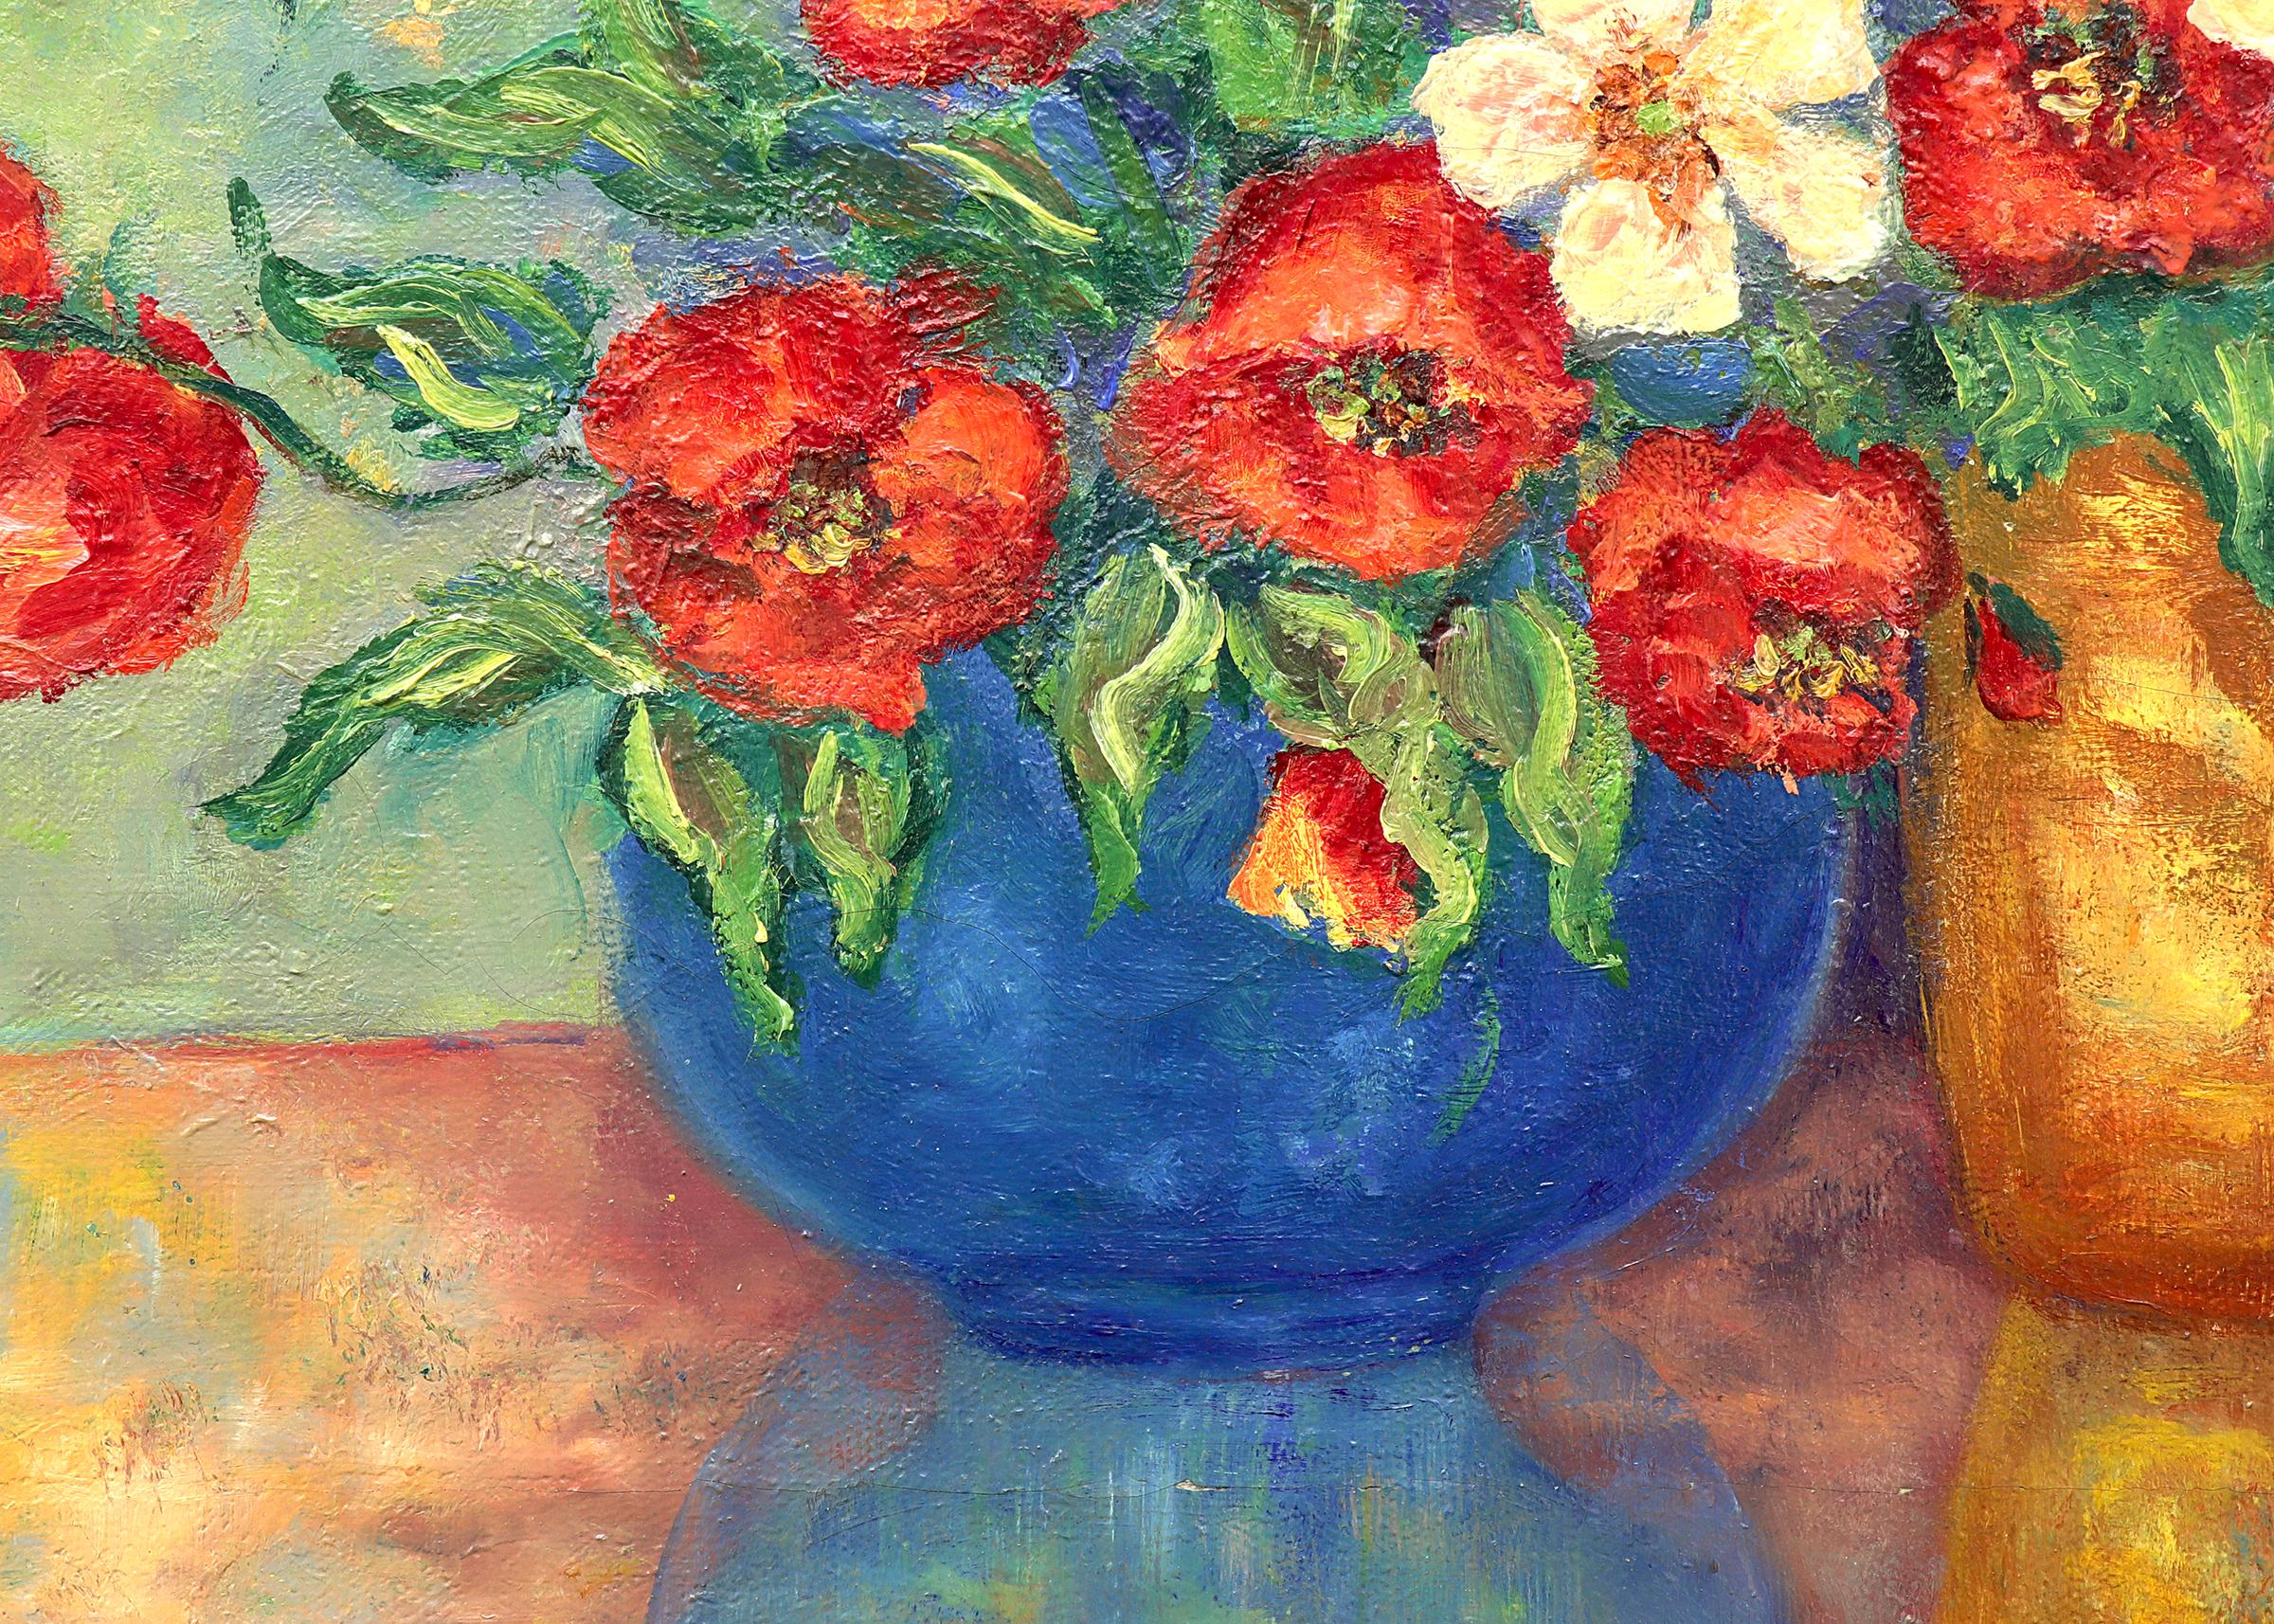 Still Life Painting with Poppies and Wildflowers in Red, White, Blue and Orange 1